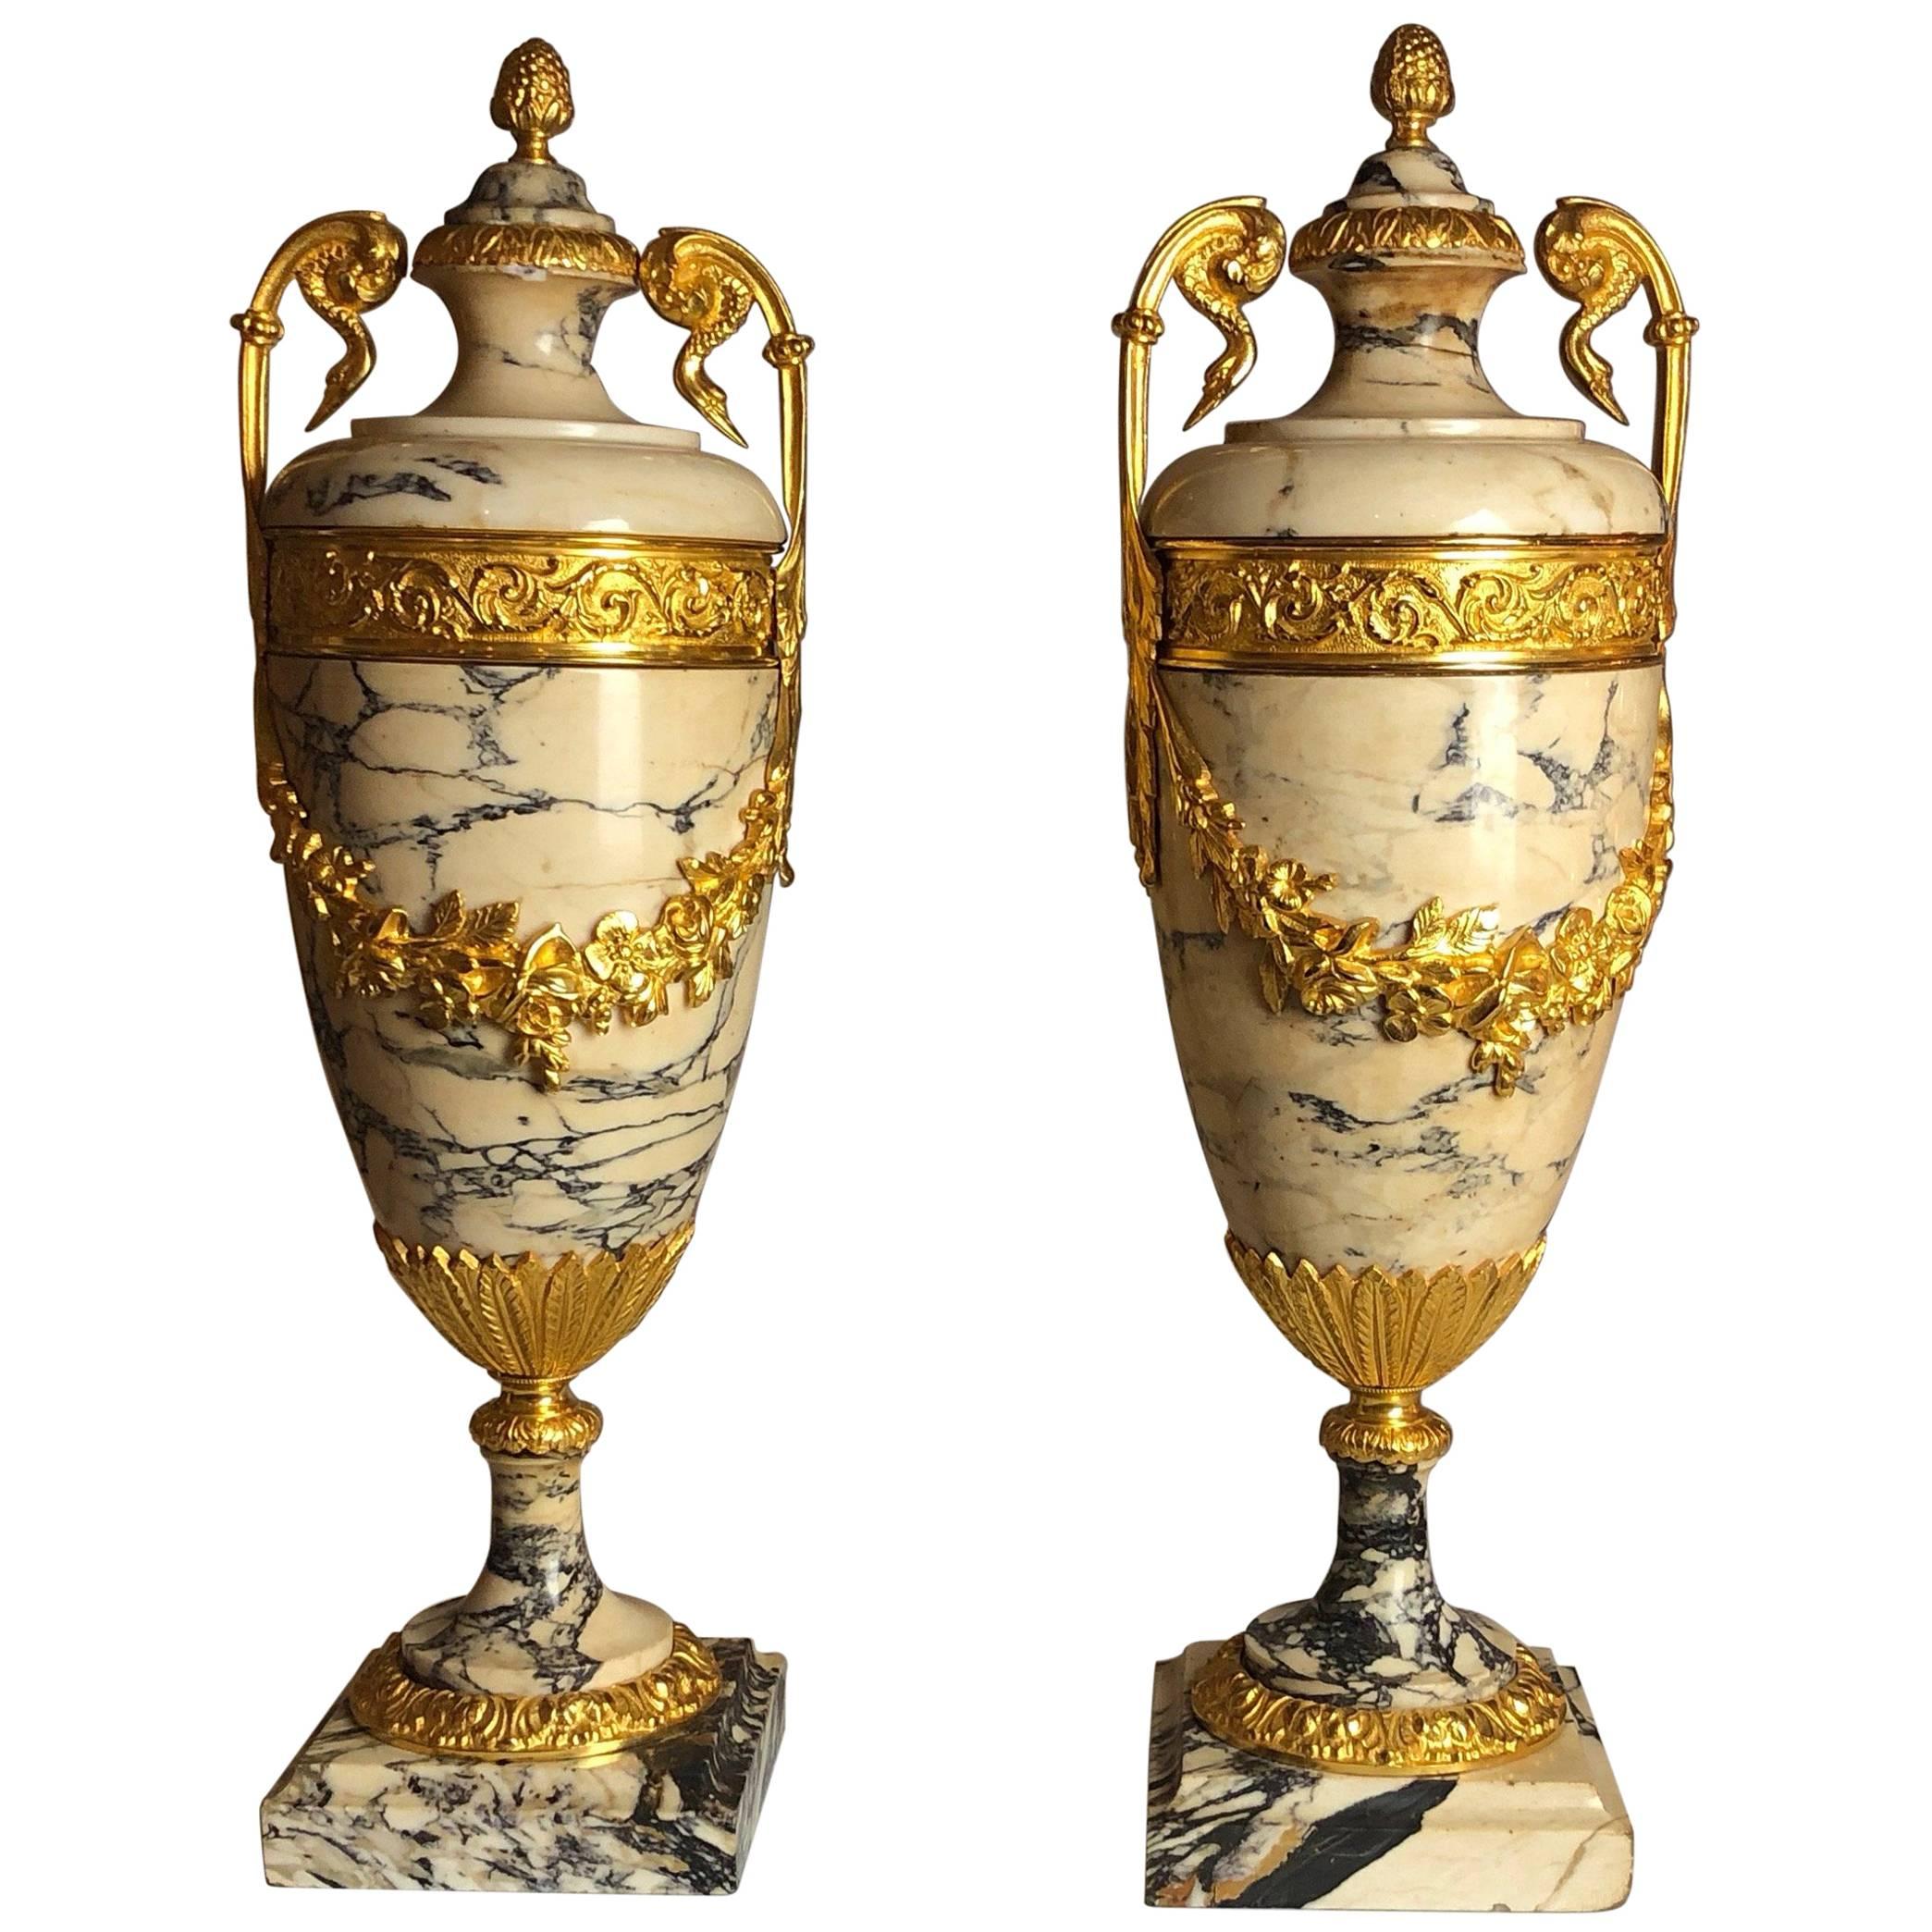 Antique Pair of Ormolu-Mounted Marble Urns, French, circa 1870